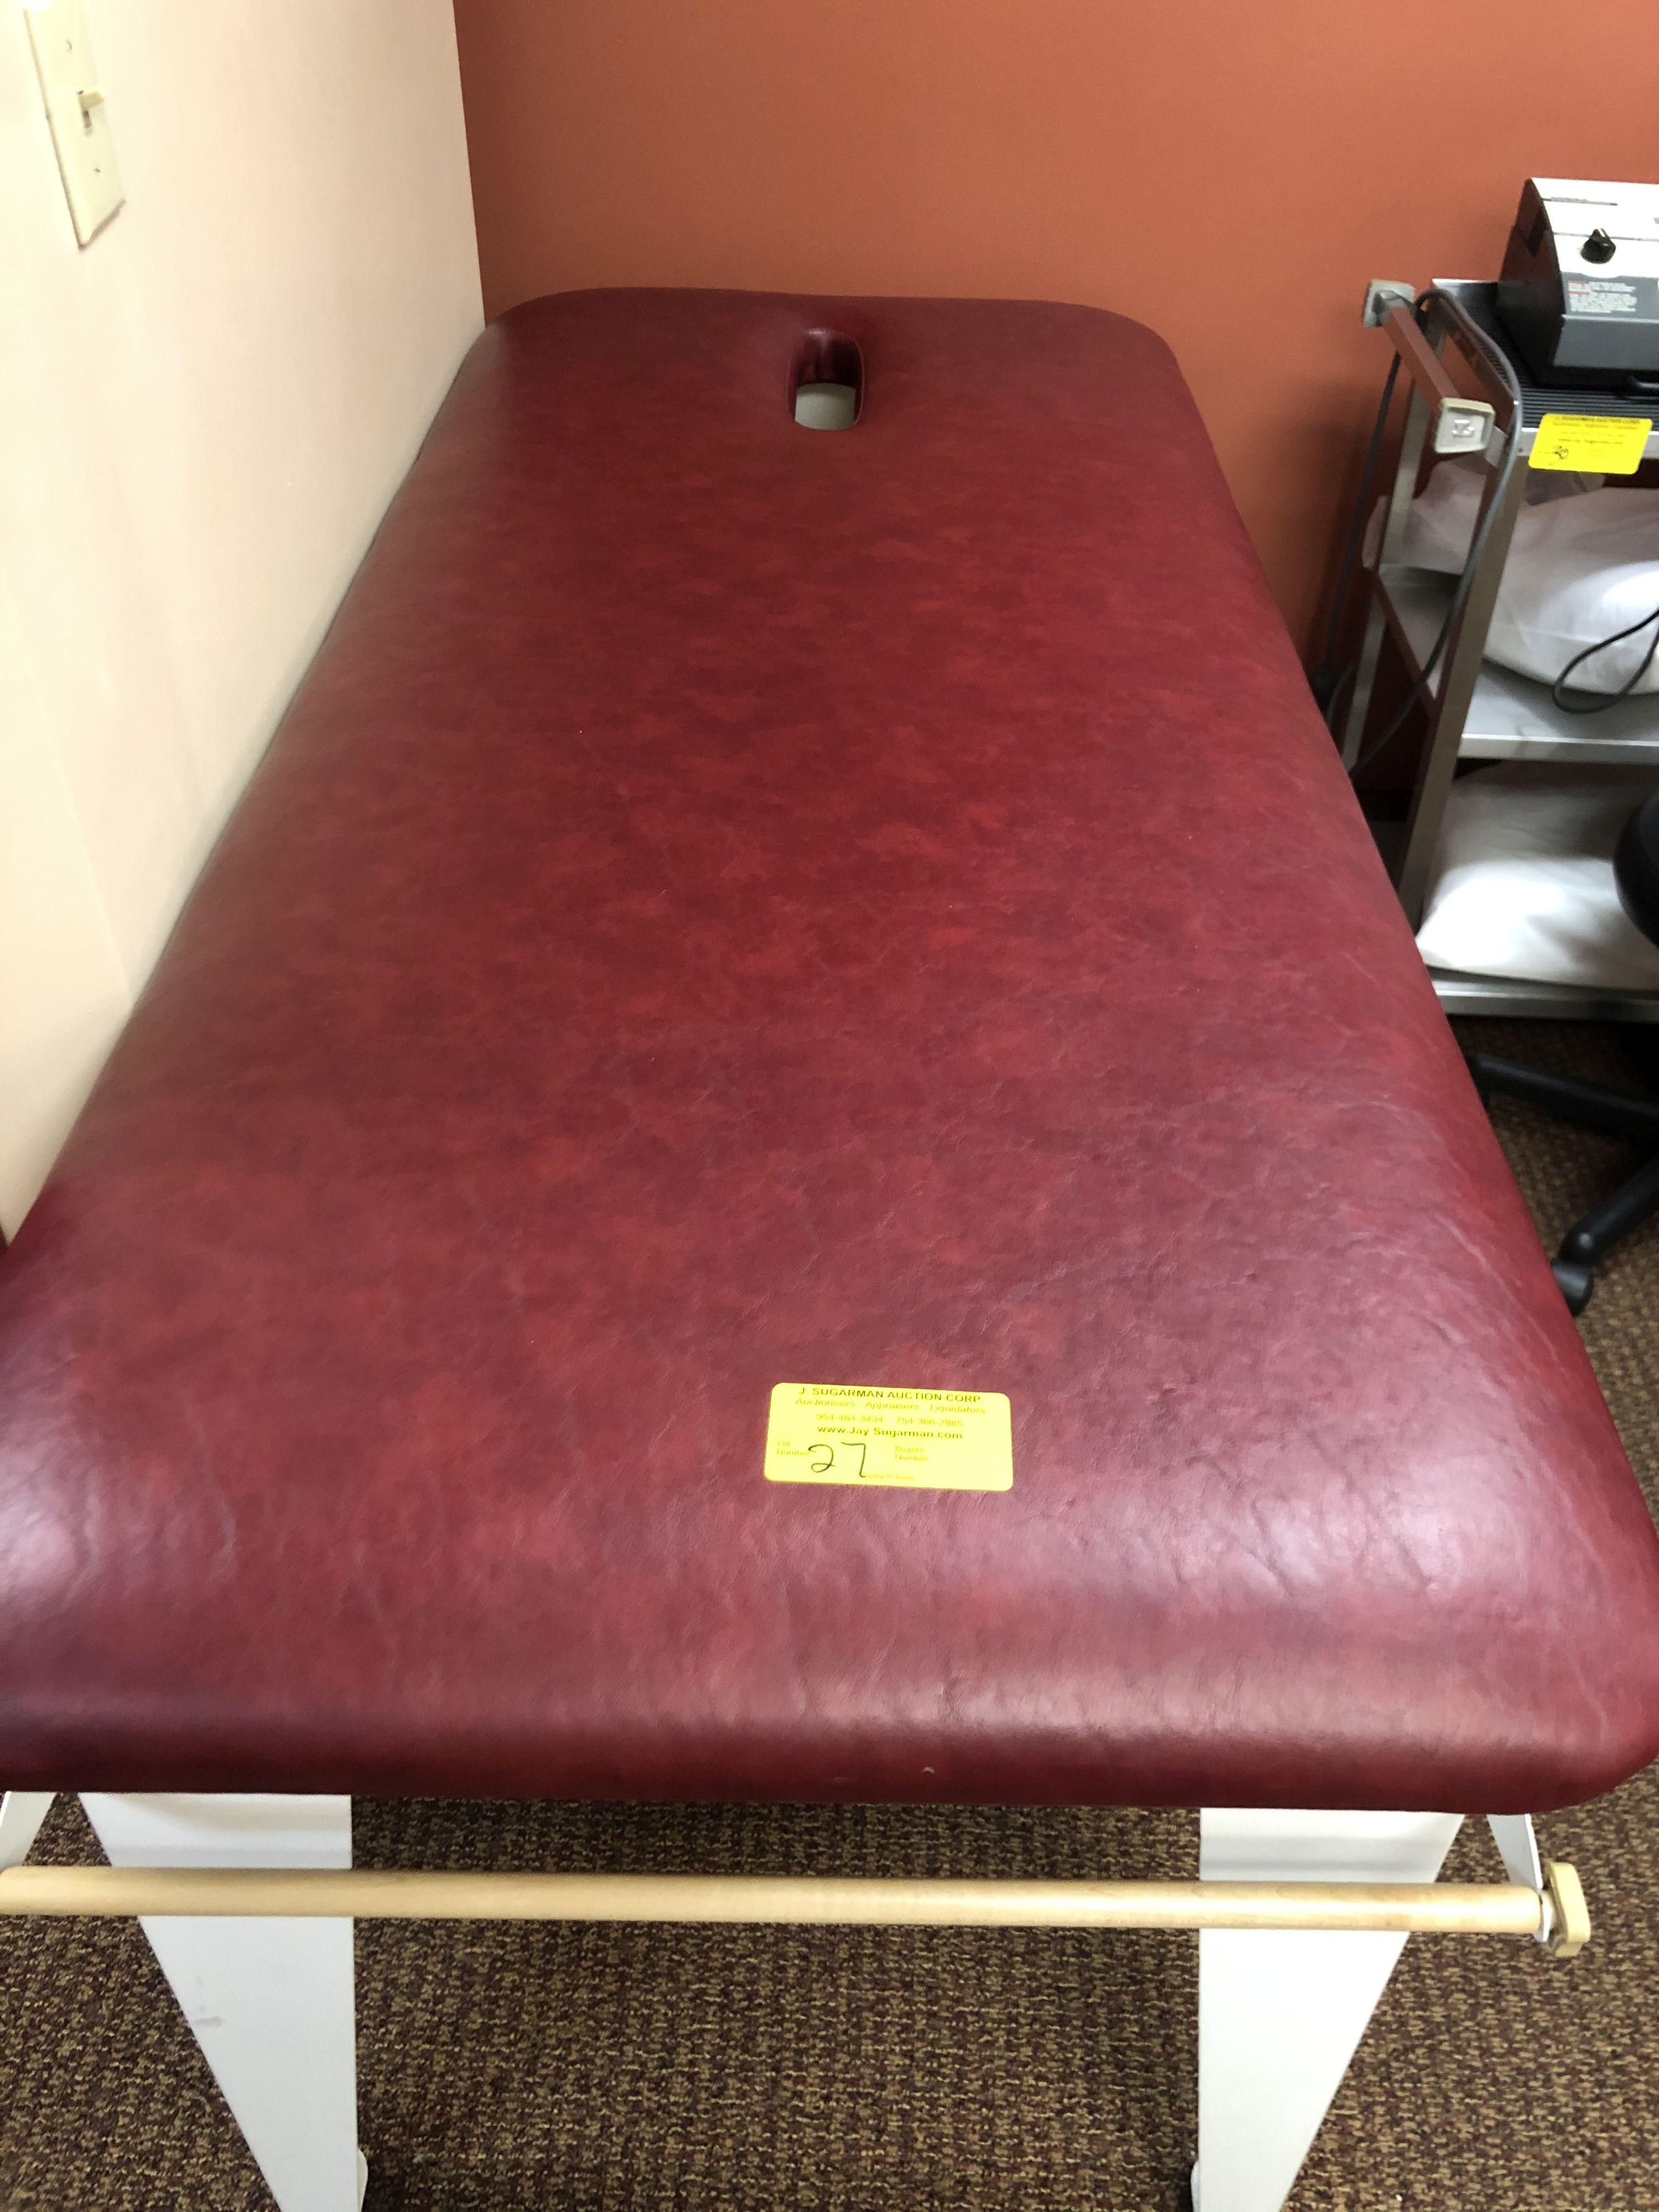 Earthlite Esquire Burgundy Massage Table